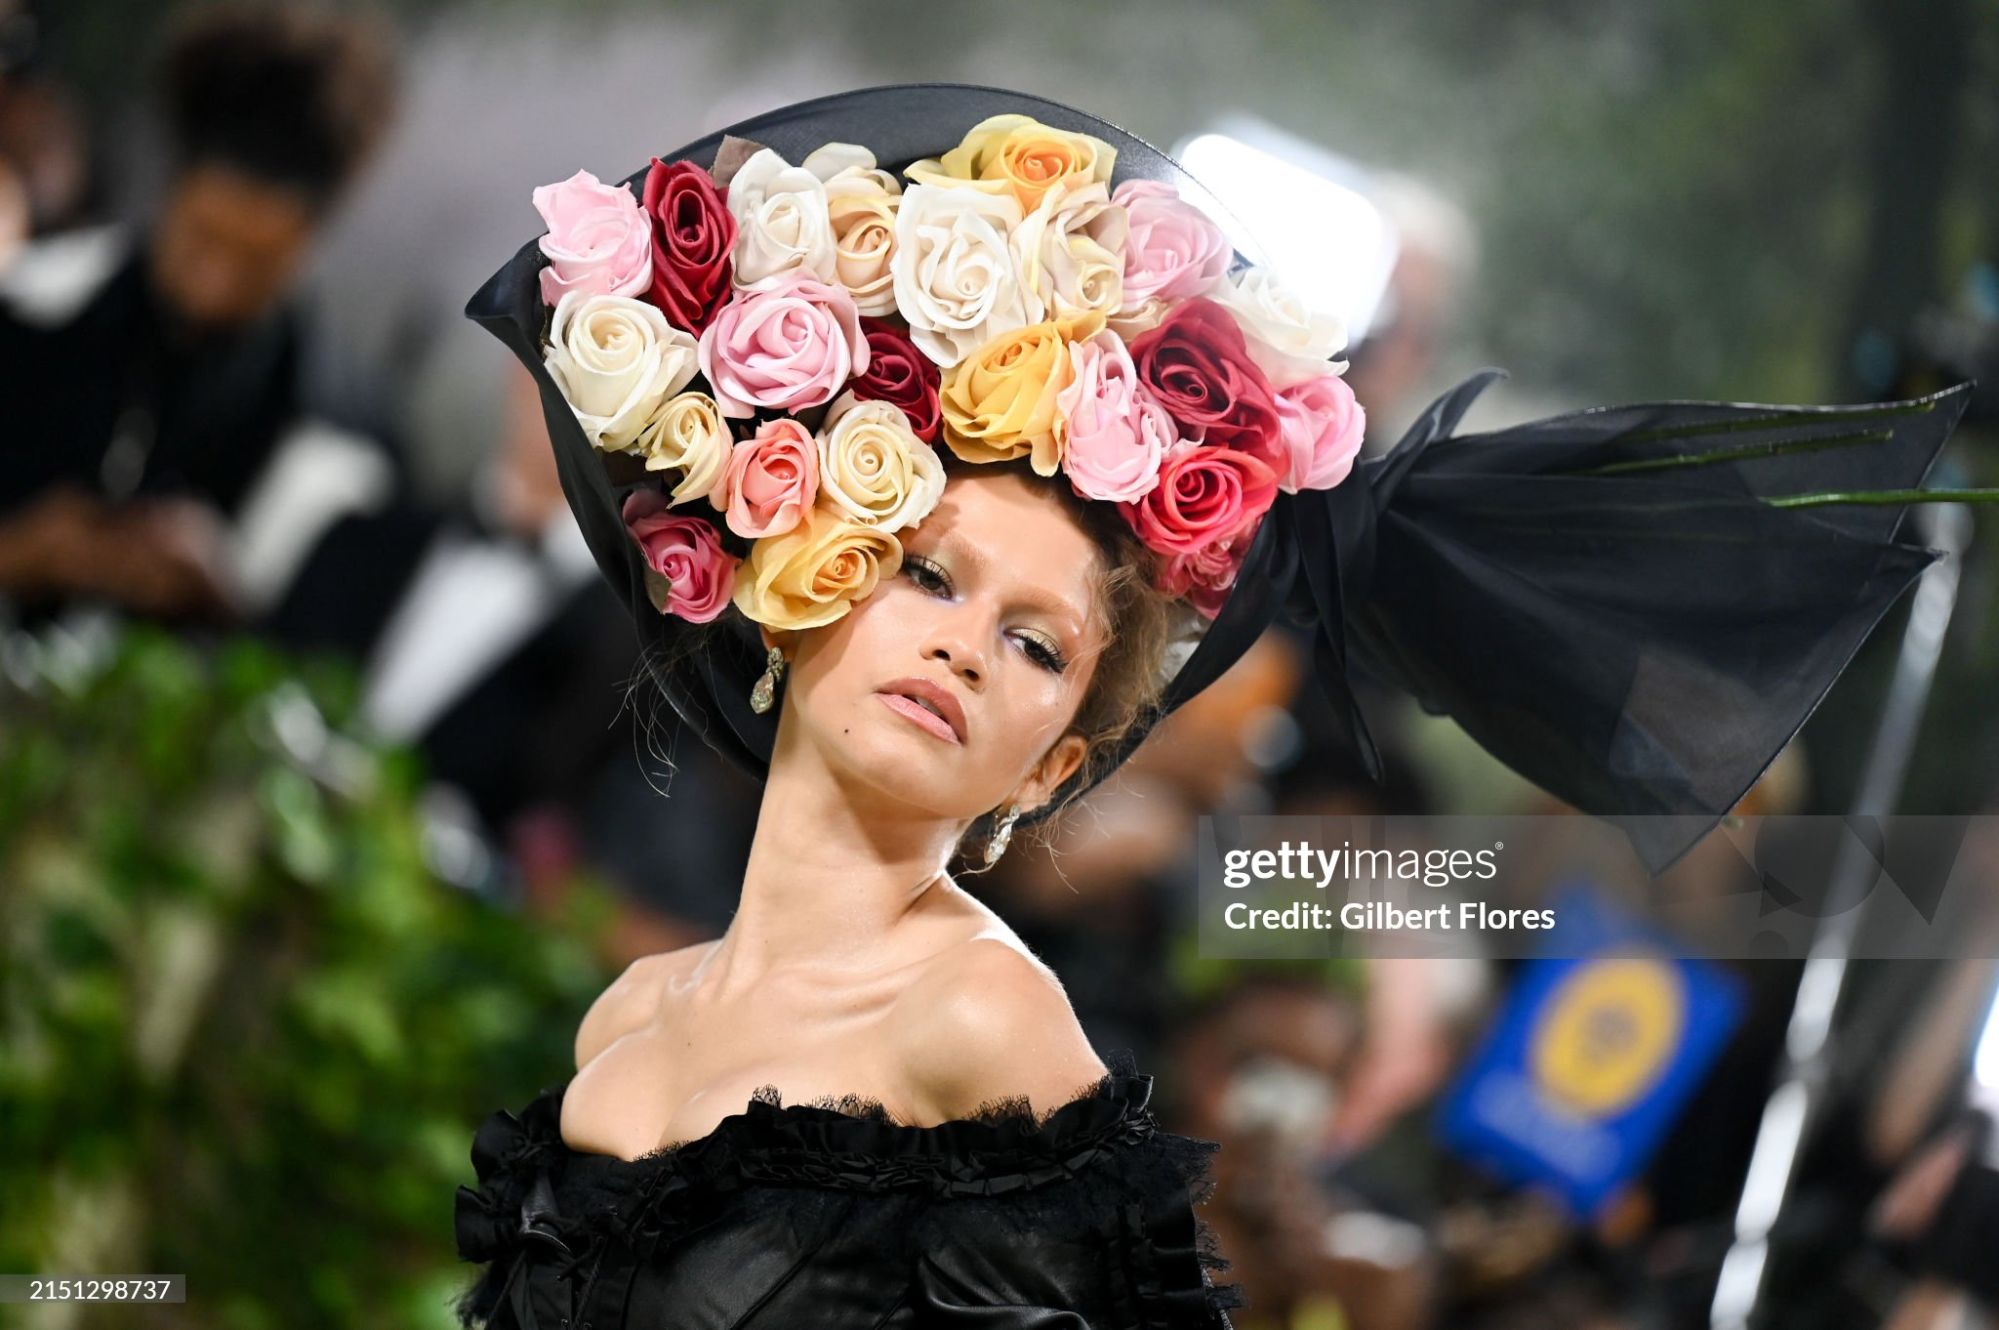 gettyimages-2151298737-2048x2048.jpg